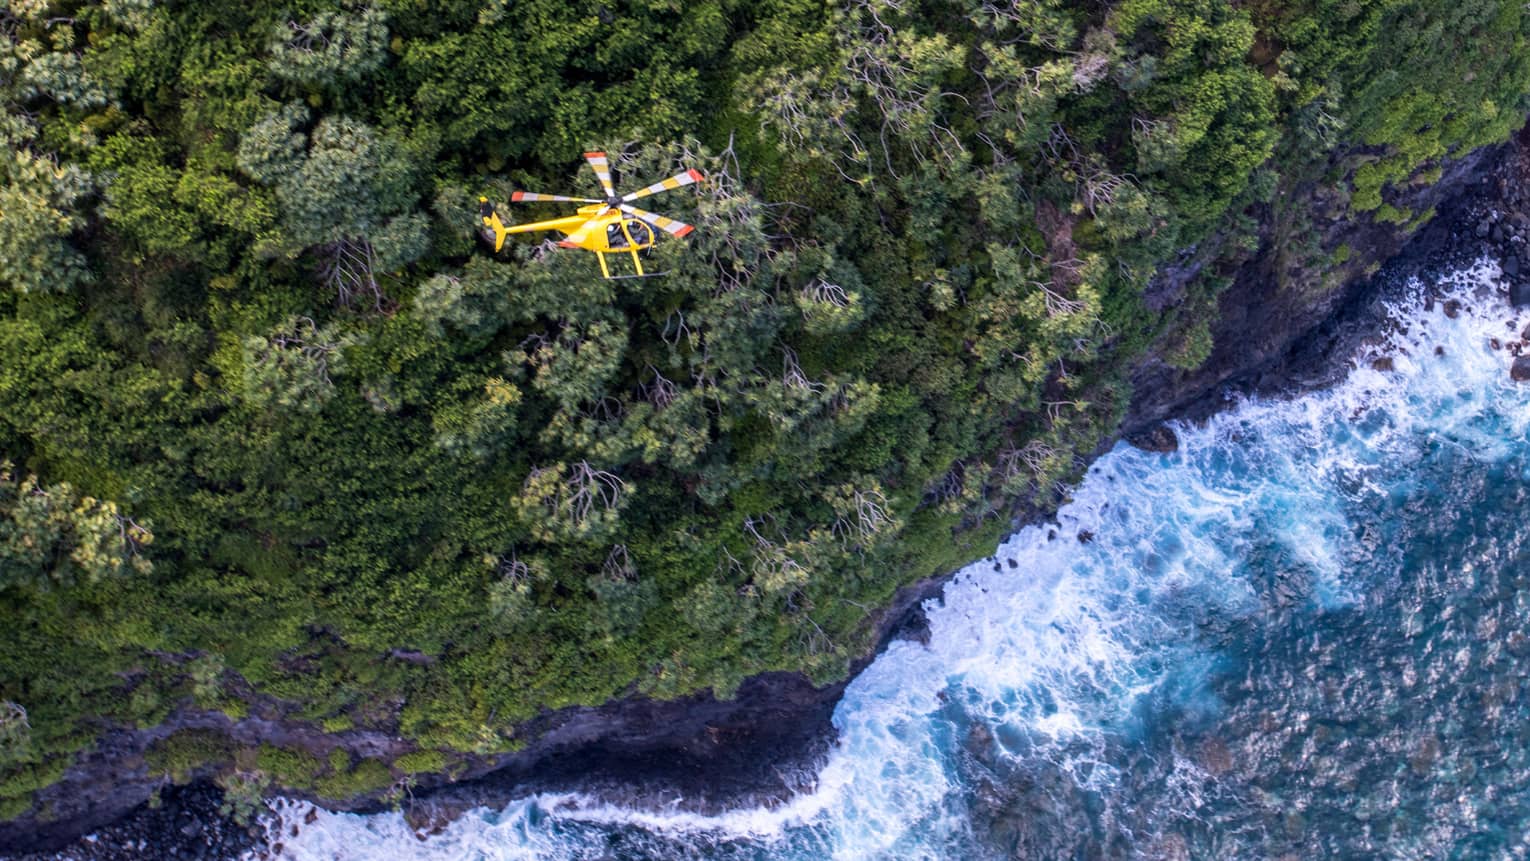 A yellow helicopter flies over a steep forested mountain. Powerful waves crash against the shoreline in the water below.